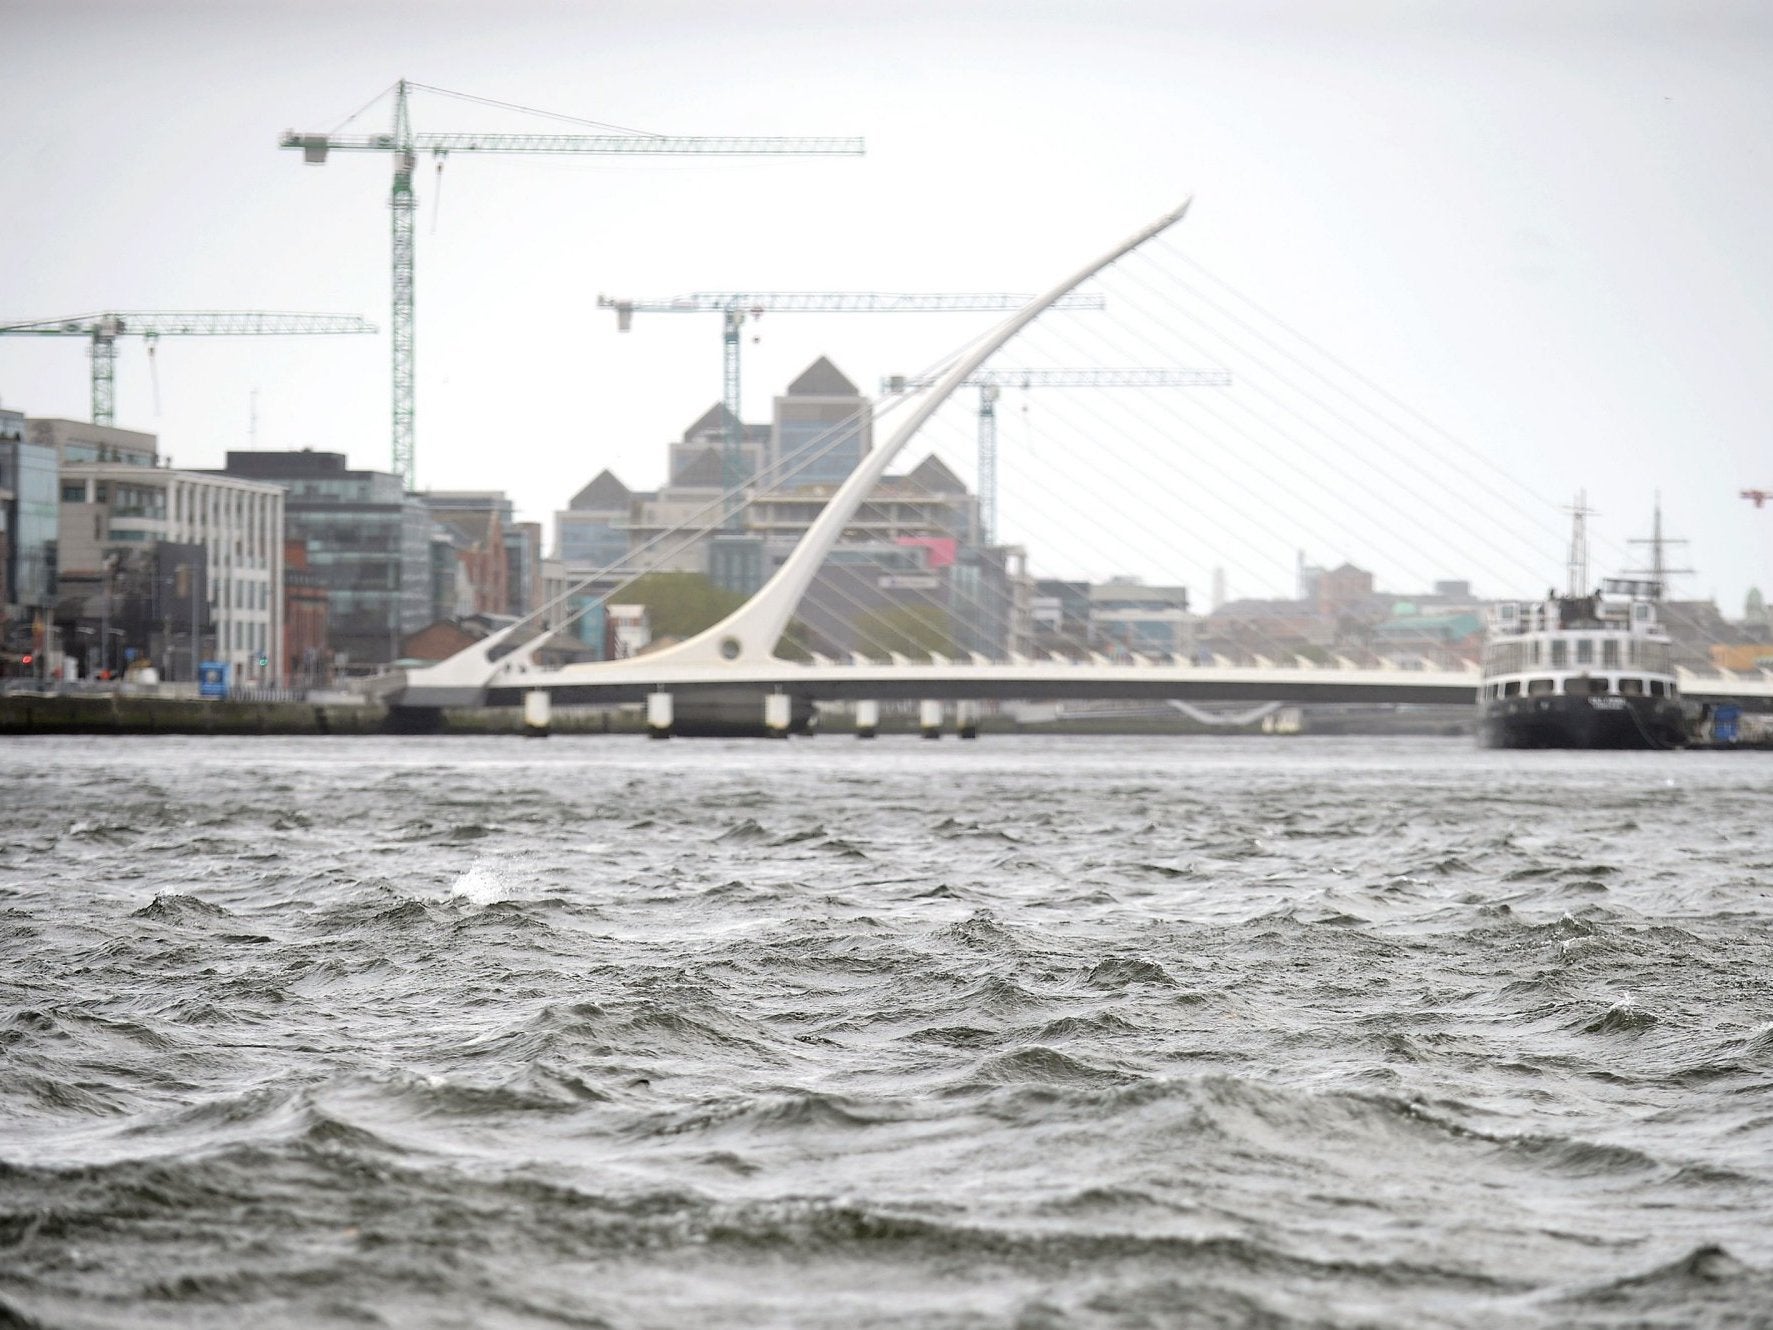 The cruise ship would likely have been docked on the River Liffey, pictured.